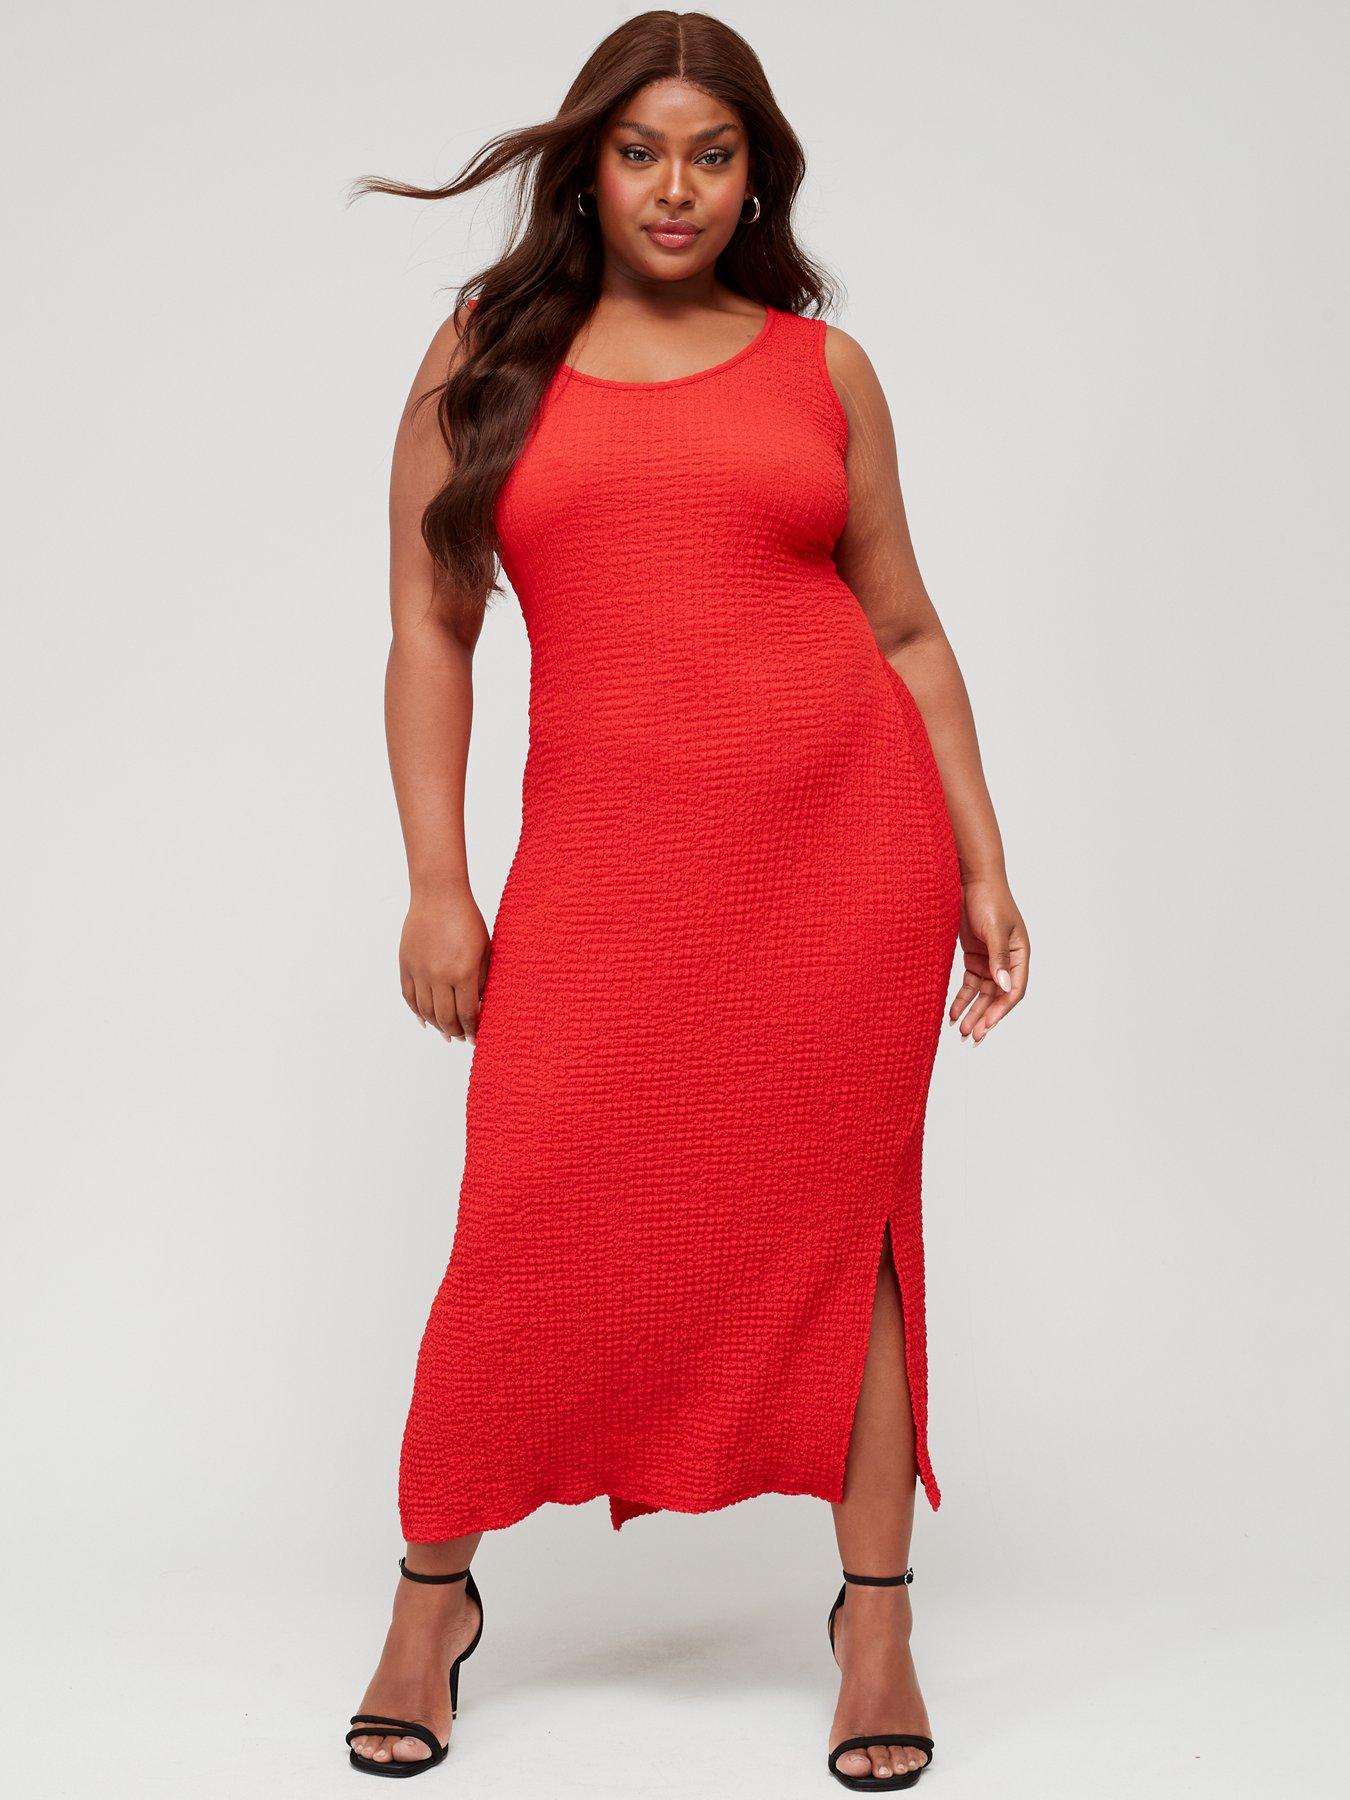 https://media.very.co.uk/i/very/VIIQU_SQ1_0000000017_RED_MDf/v-by-very-curve-scoop-neck-sleeveless-texture-midaxi-dress-red.jpg?$180x240_retinamobilex2$&$roundel_very$&p1_img=ve-clearance-roundel